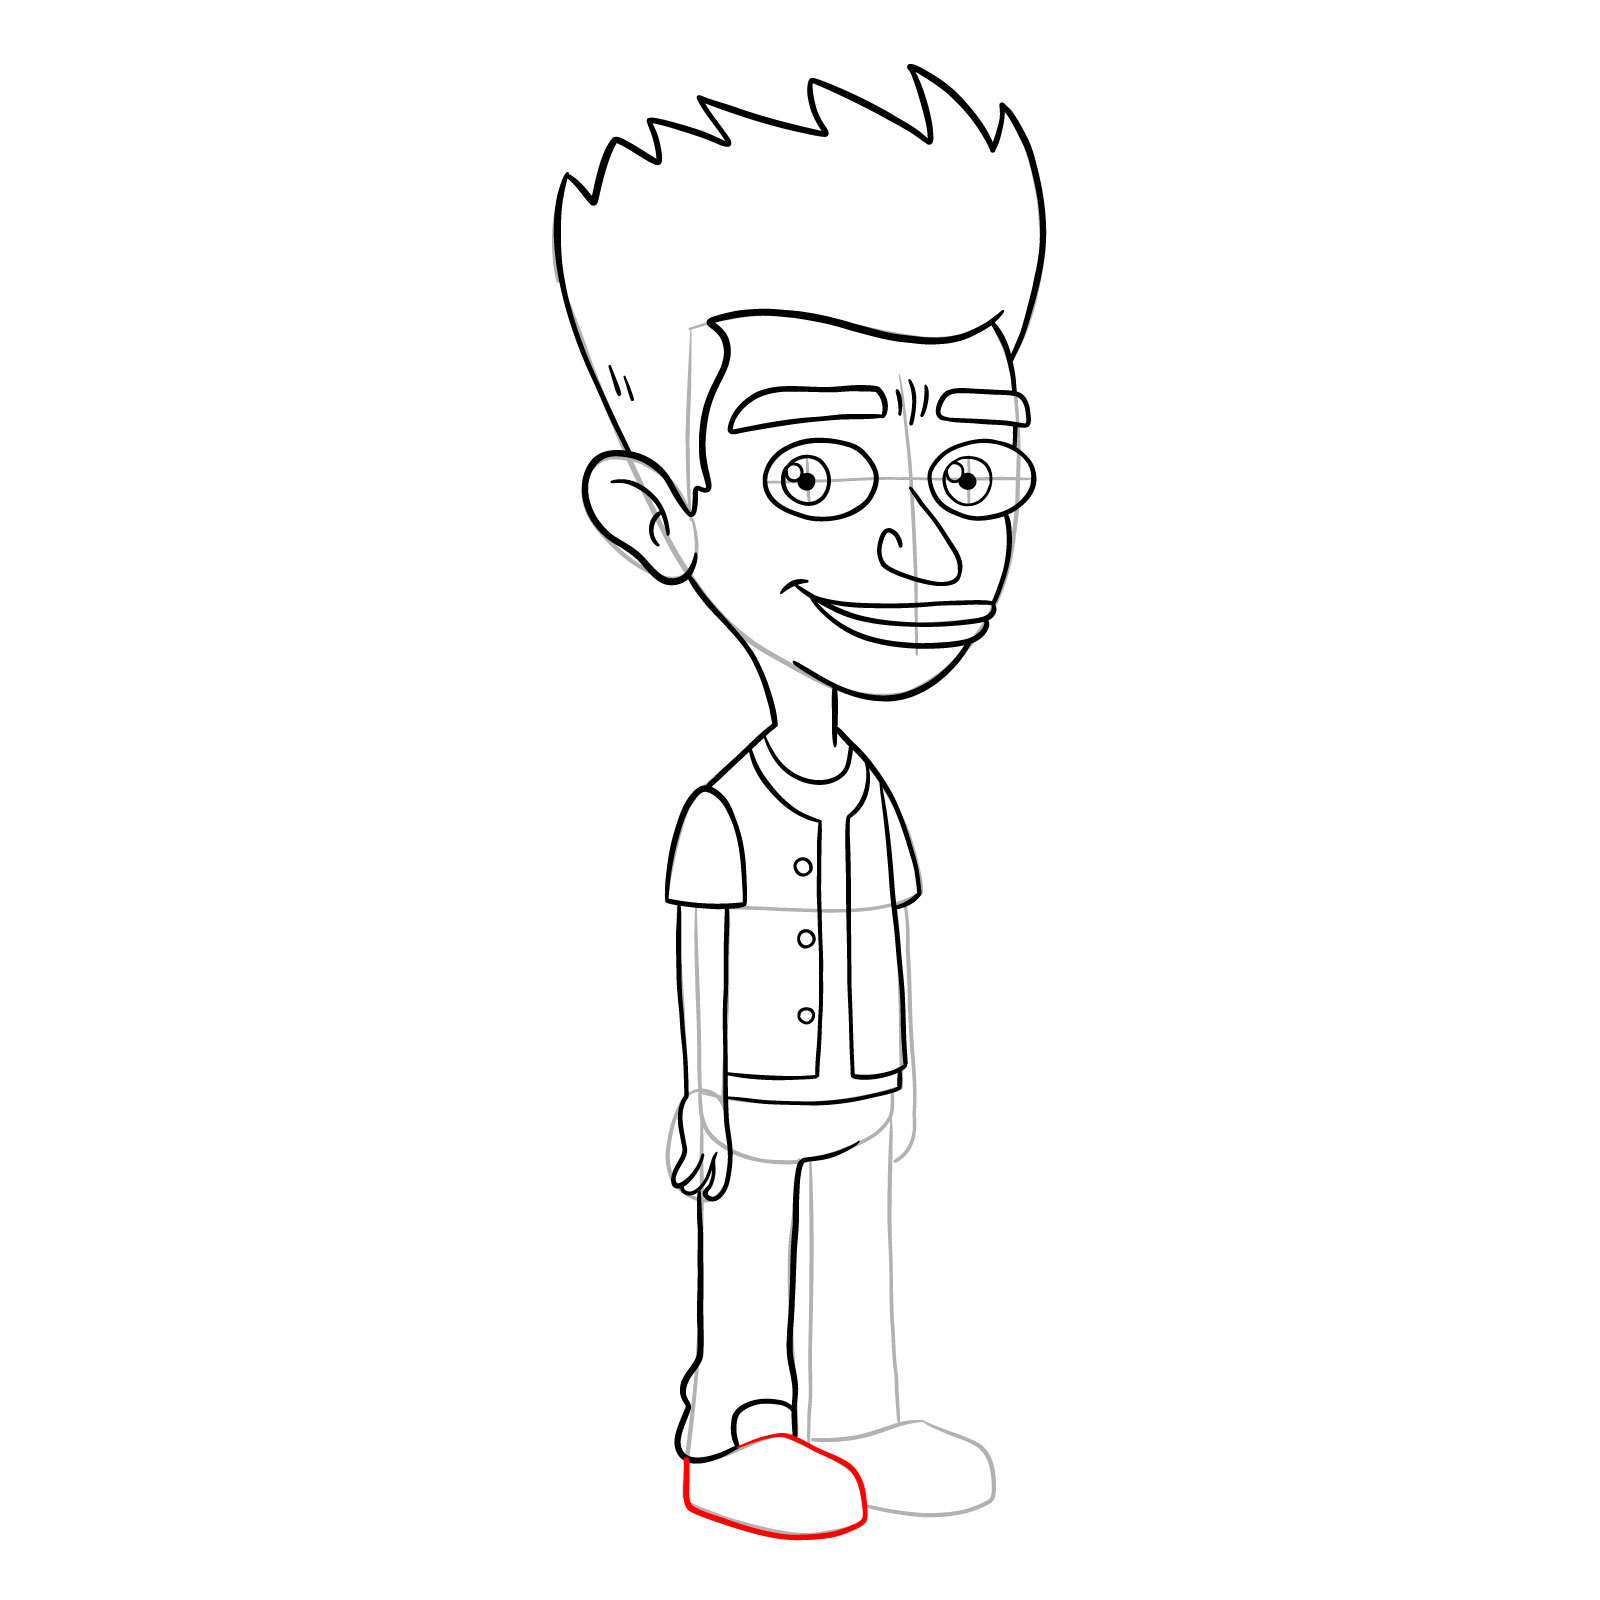 How to draw Jay from Big Mouth - step 17